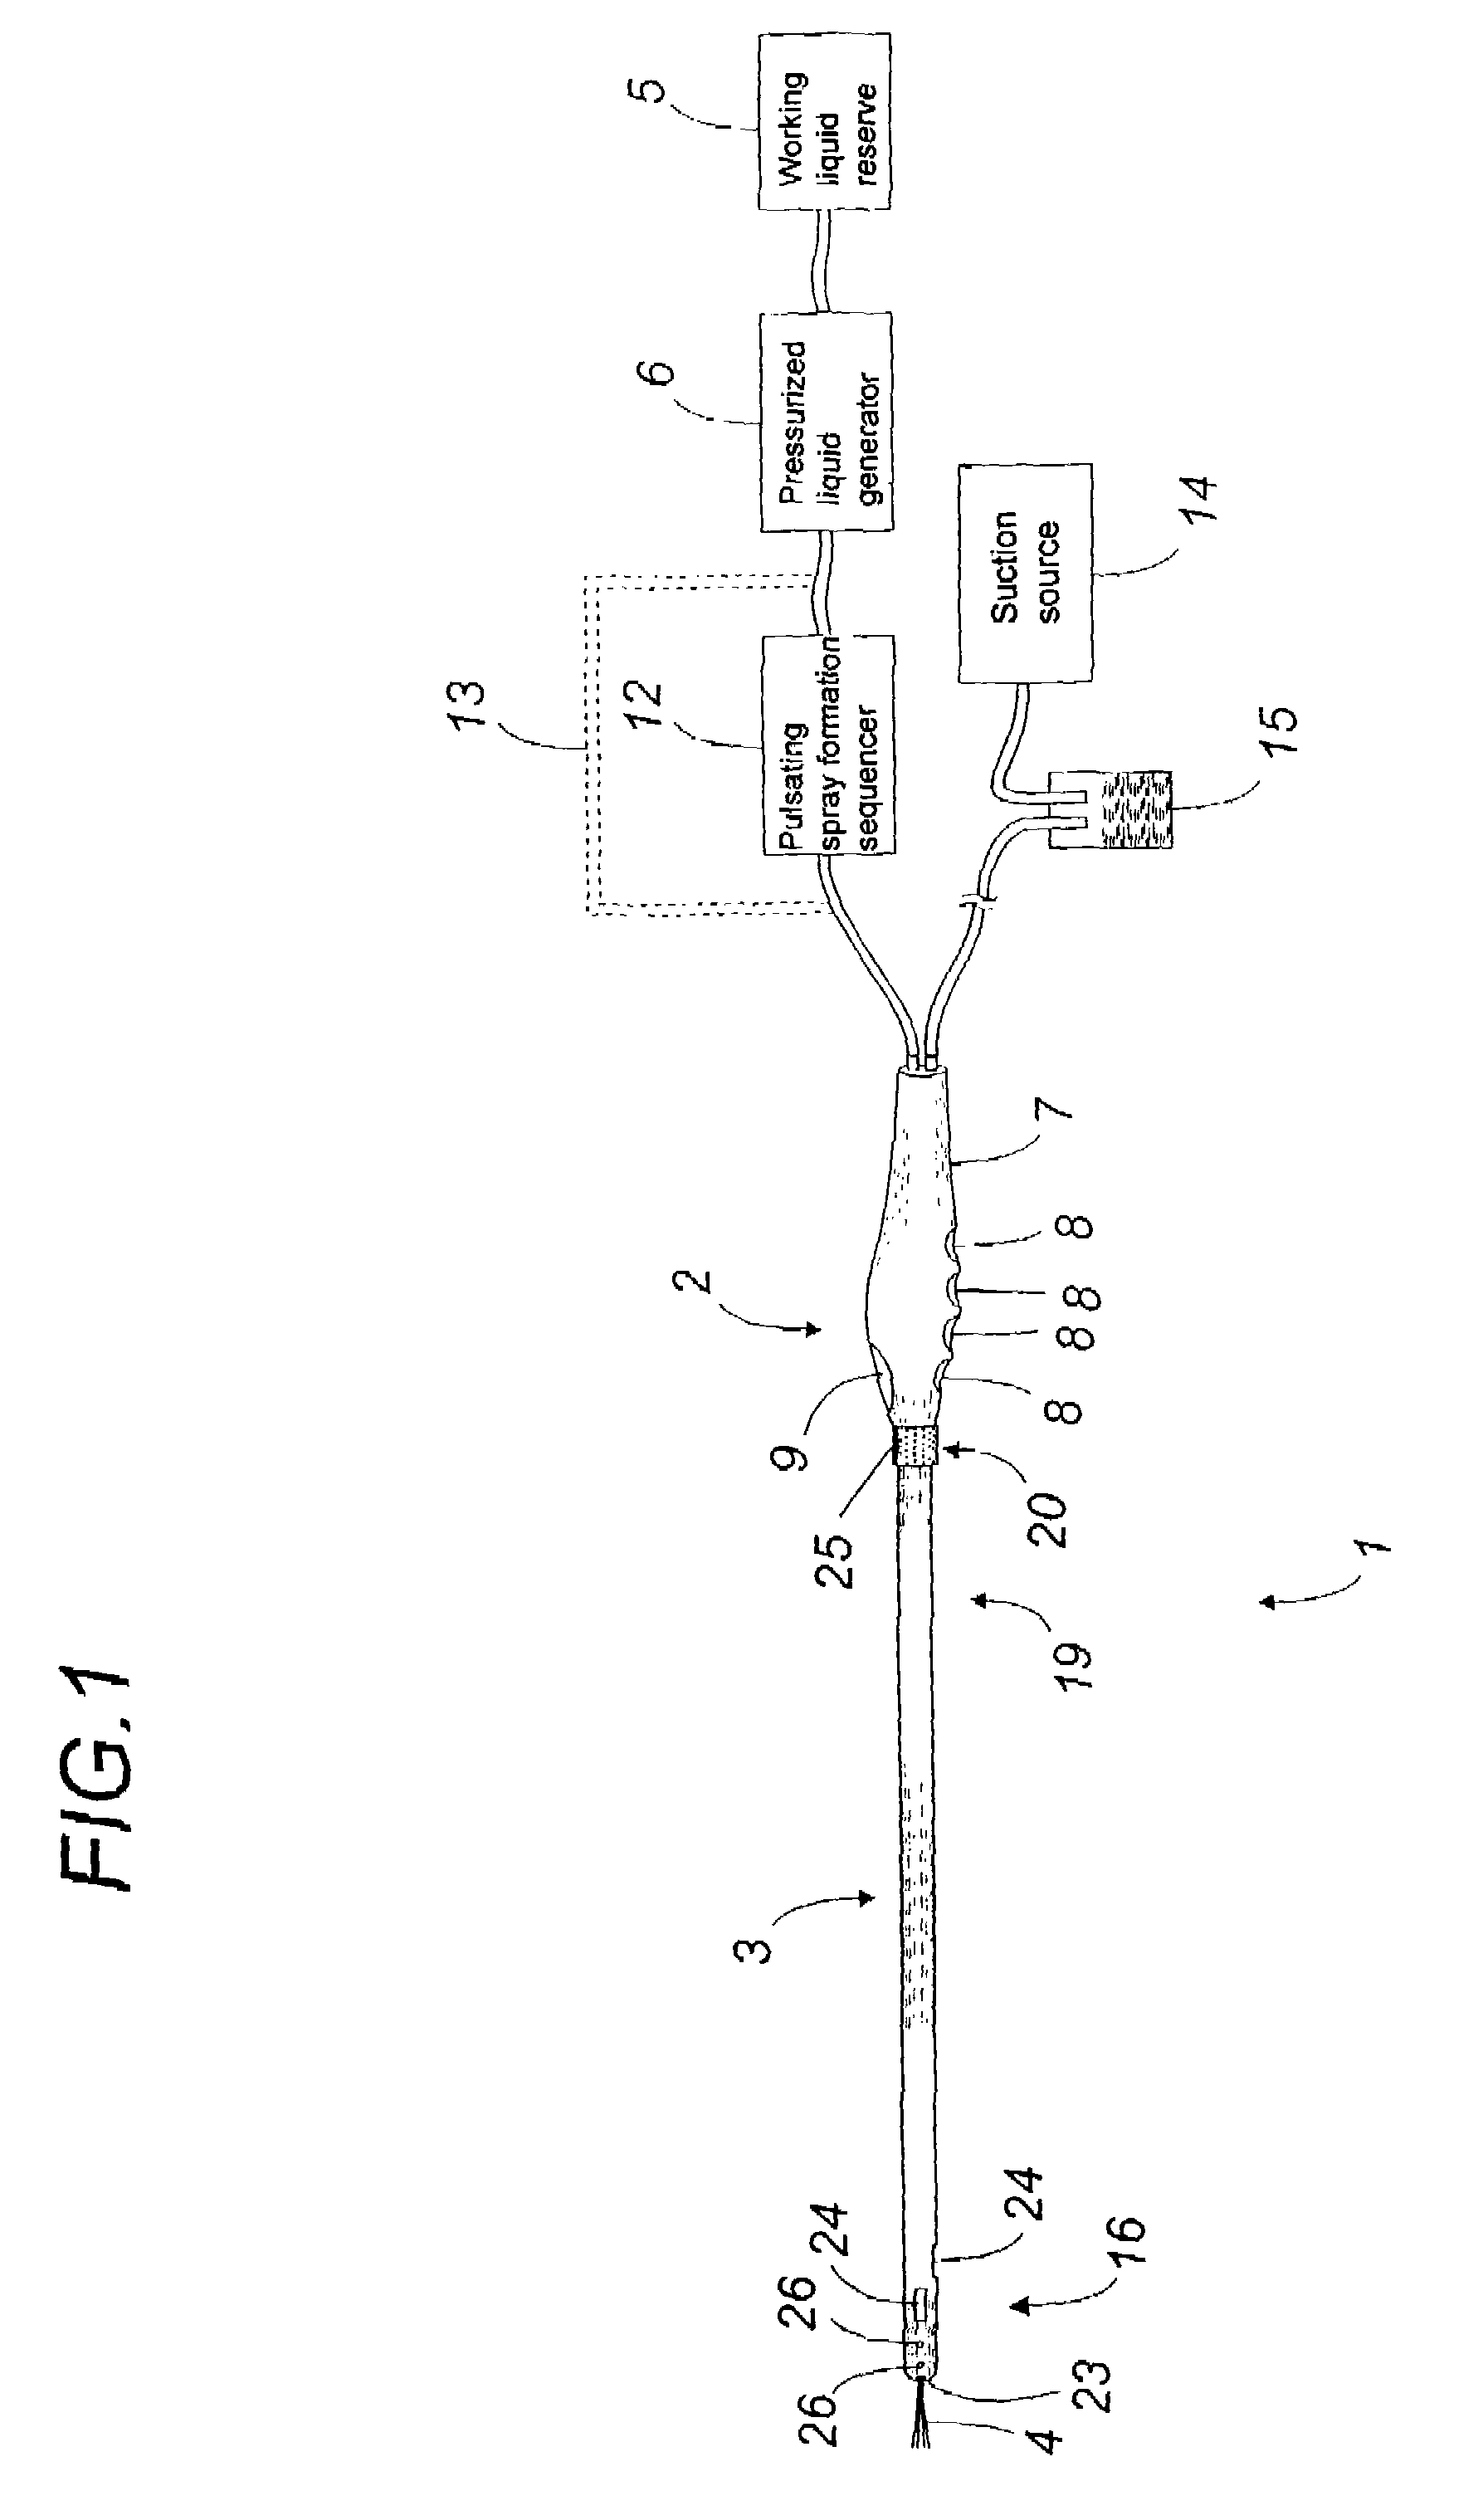 Liposuction apparatus with pressurized liquid spray and liposuction method using the apparatus